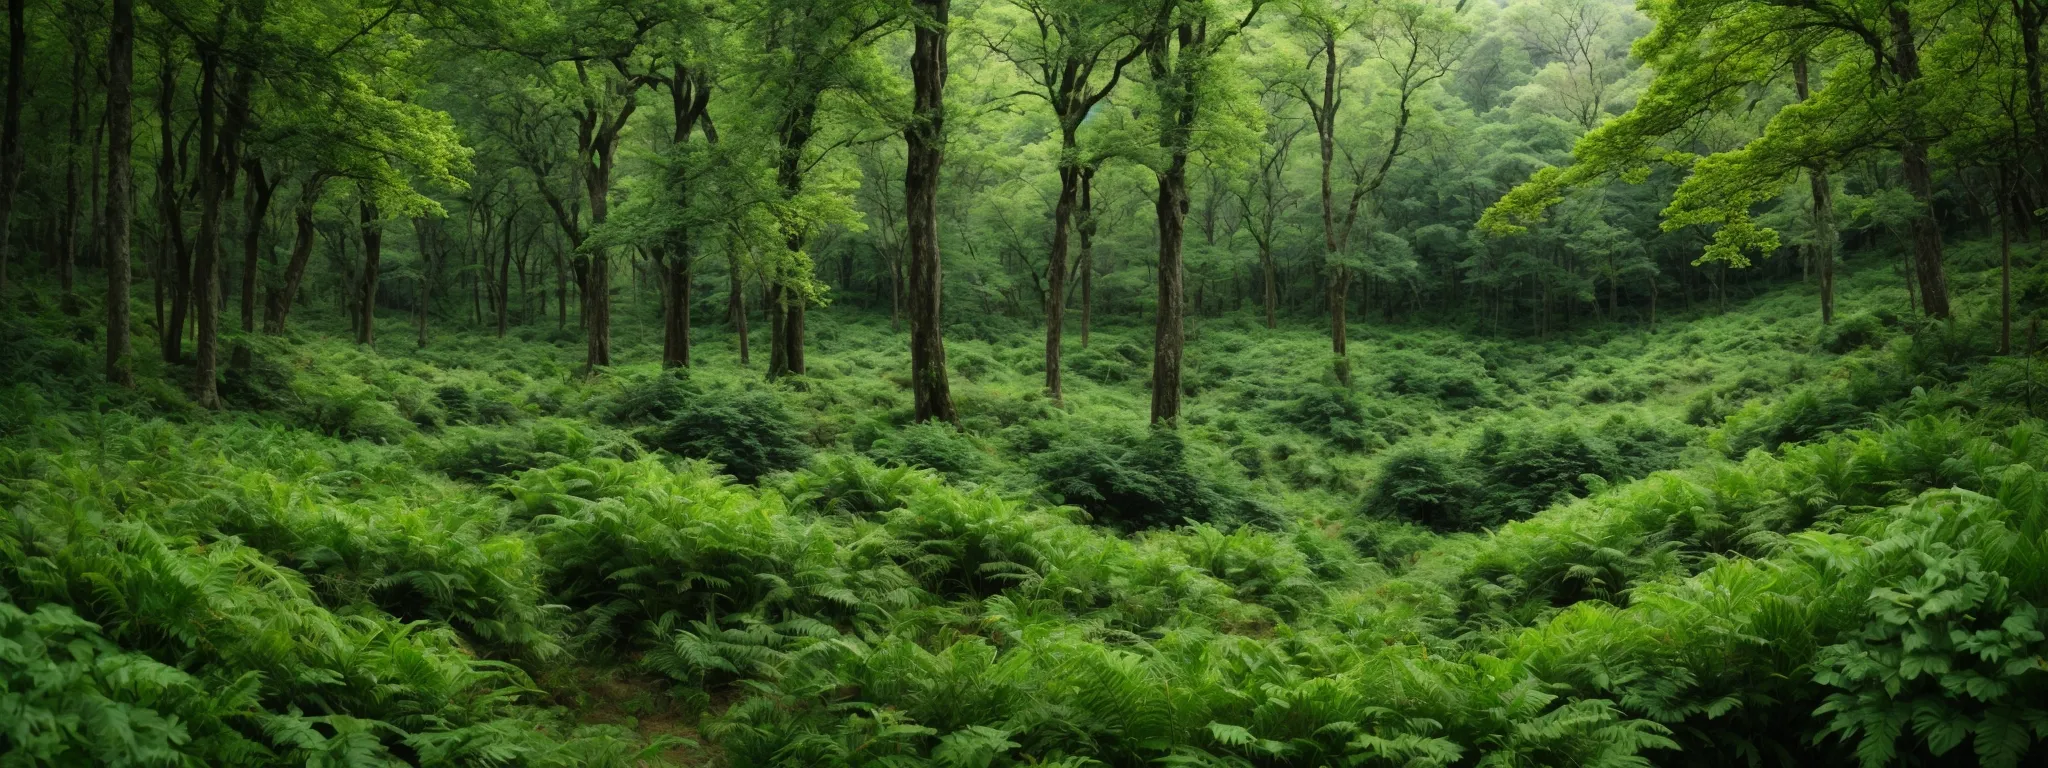 a panoramic view of a thriving green forest symbolizing organic growth and ethical natural practices.